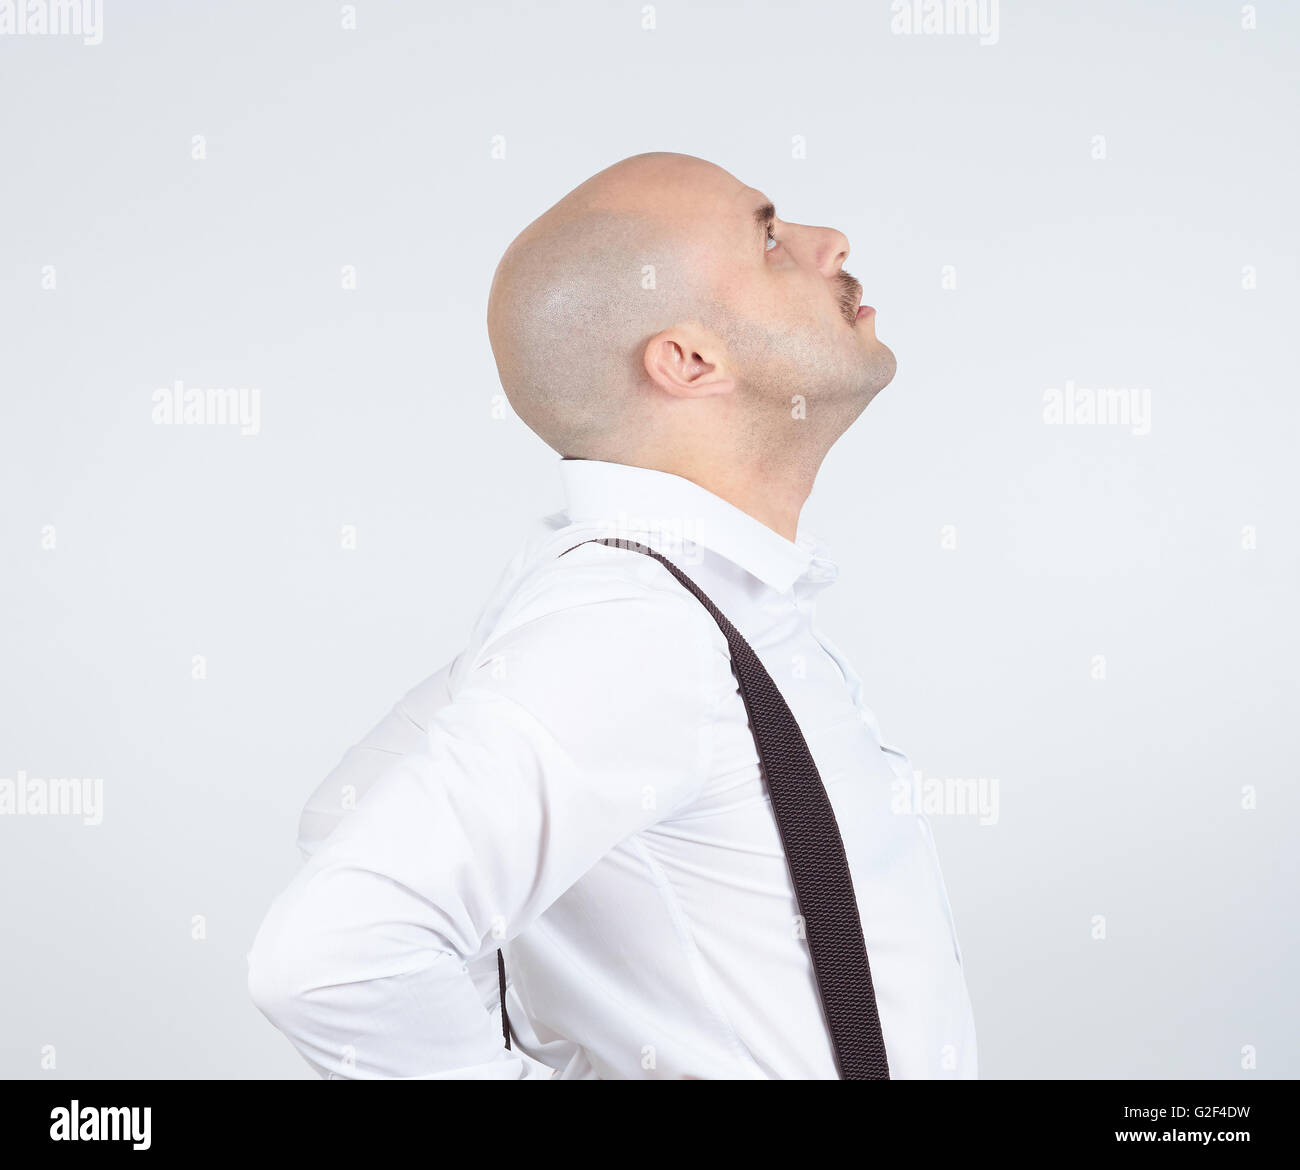 Bald man looking up. Side view. Thoughts, ideas. Stock Photo